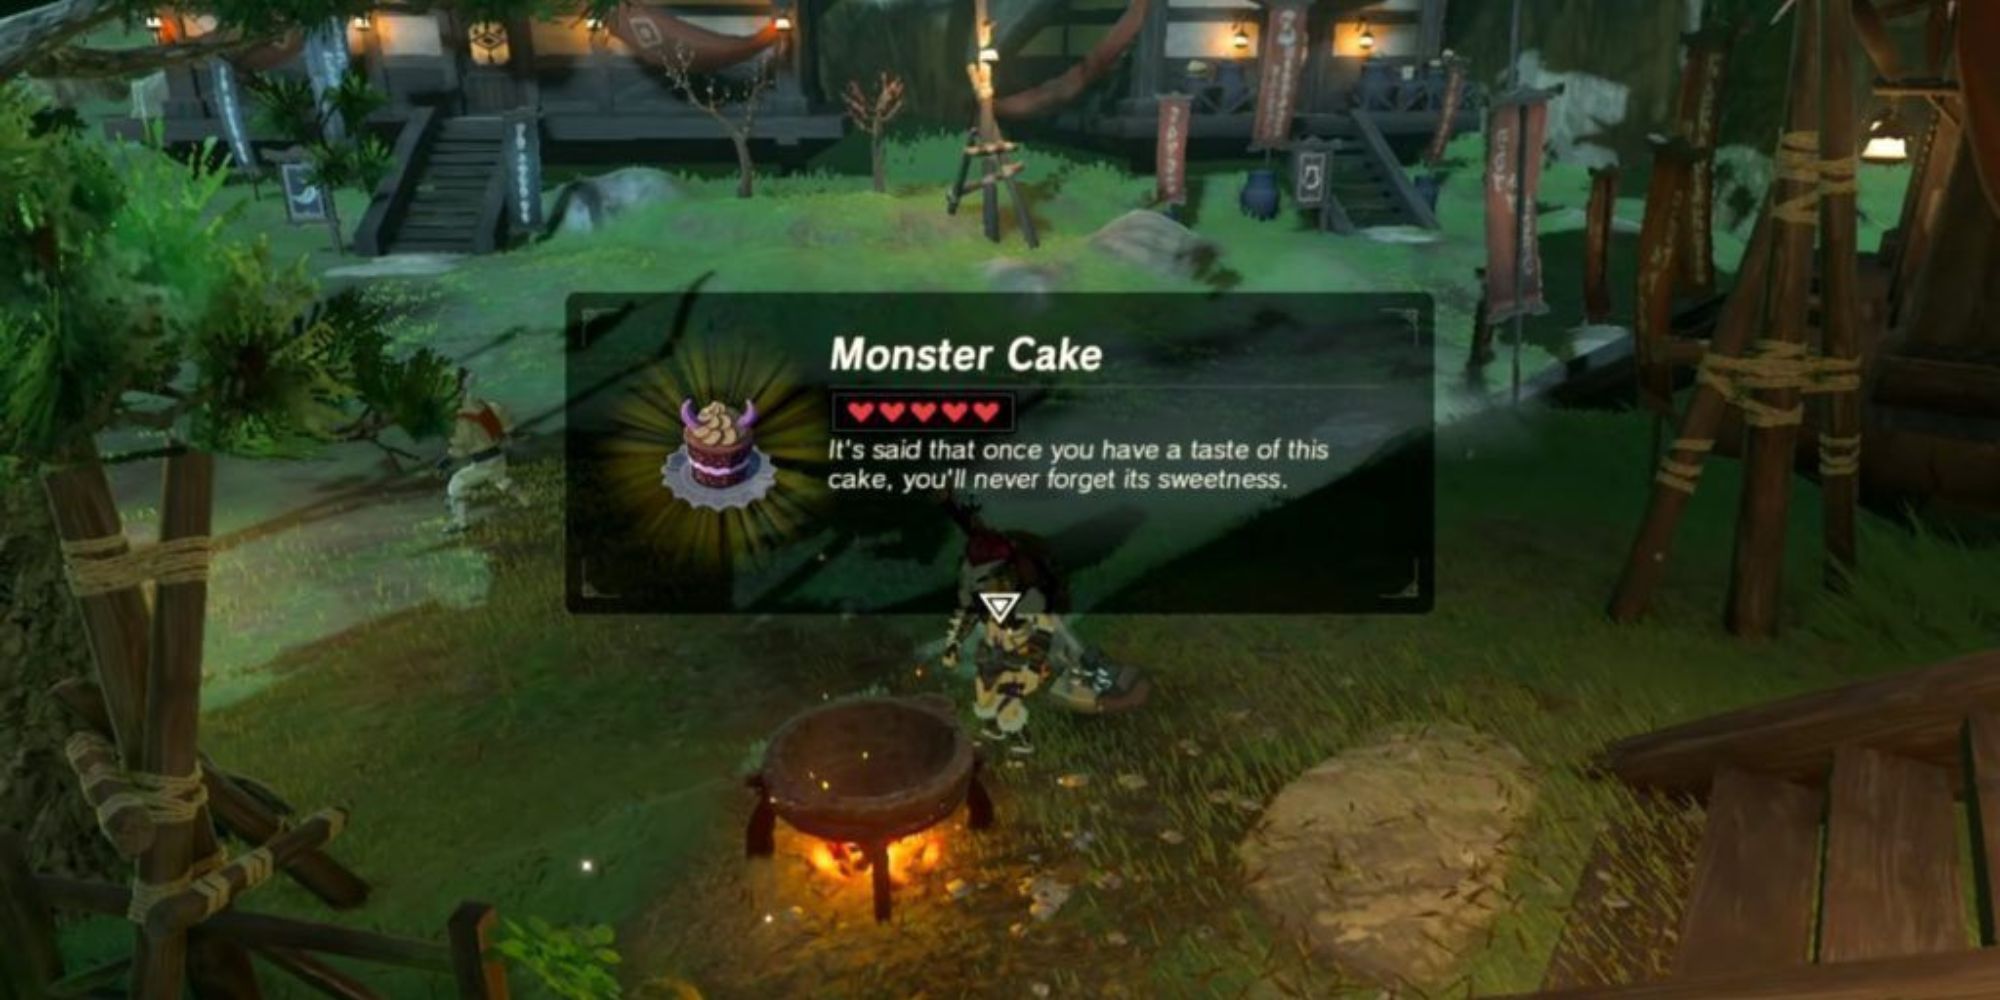 The description of a monster cake after using a pan to bake one in Breath of the wild